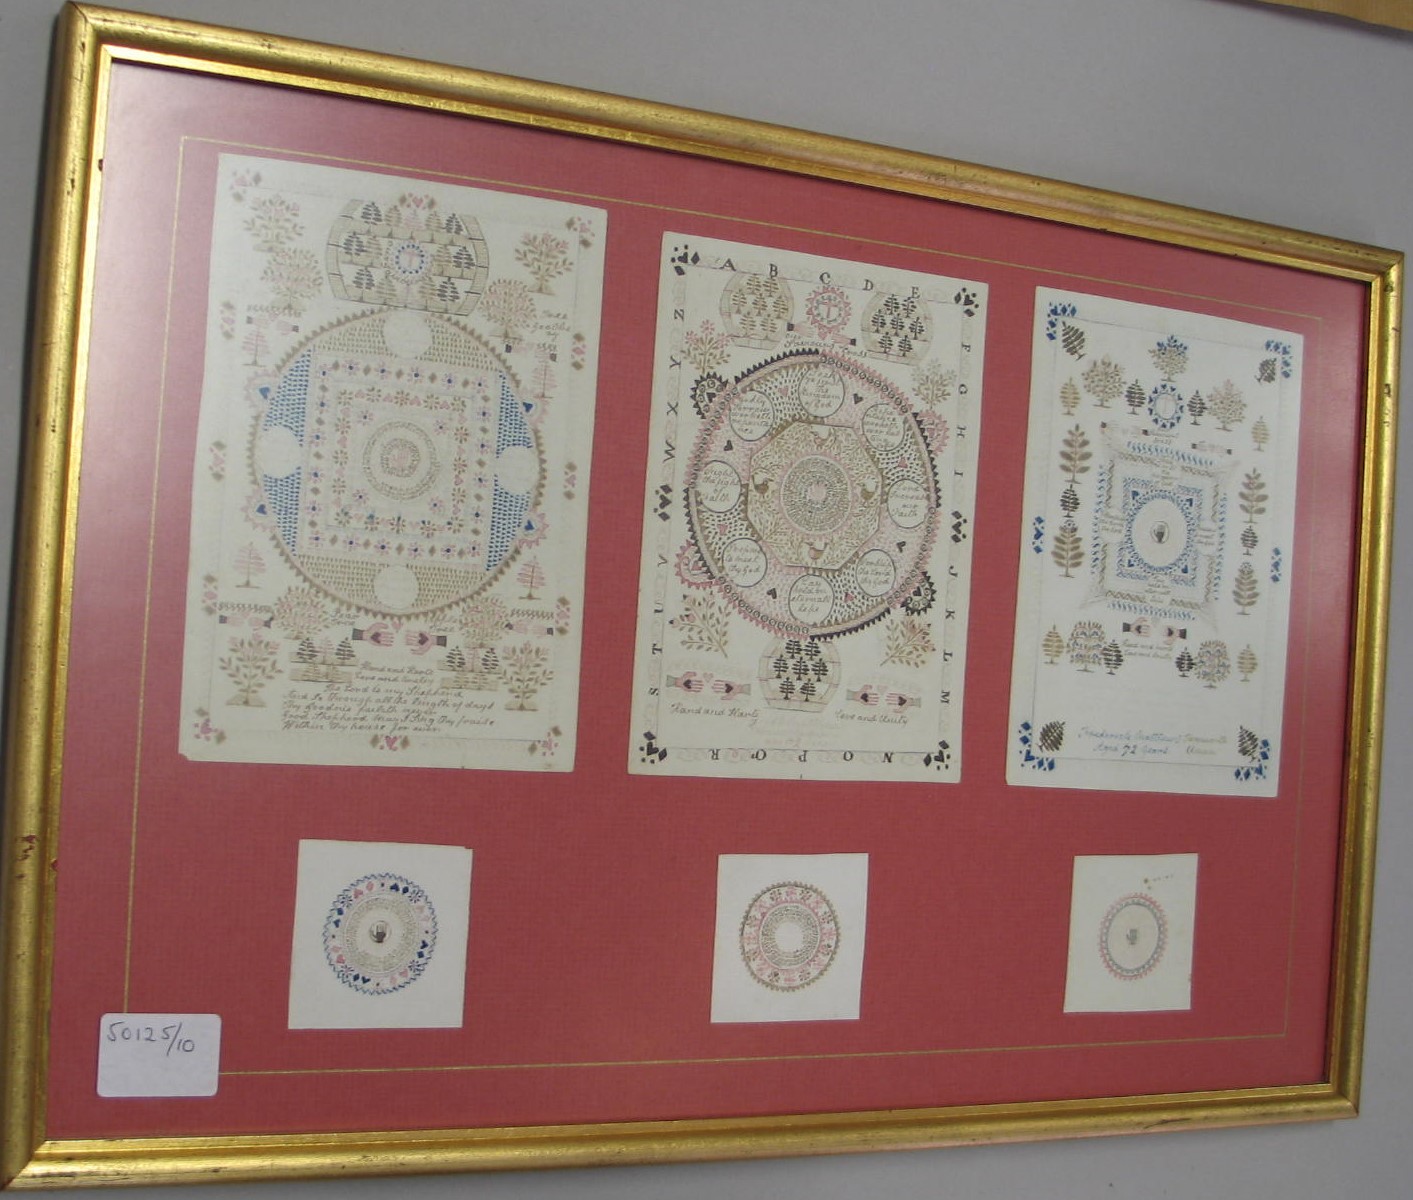 FREDERICK MATTHEWS, a group of watercolour designs in the manner of samplers, done whilst a resident